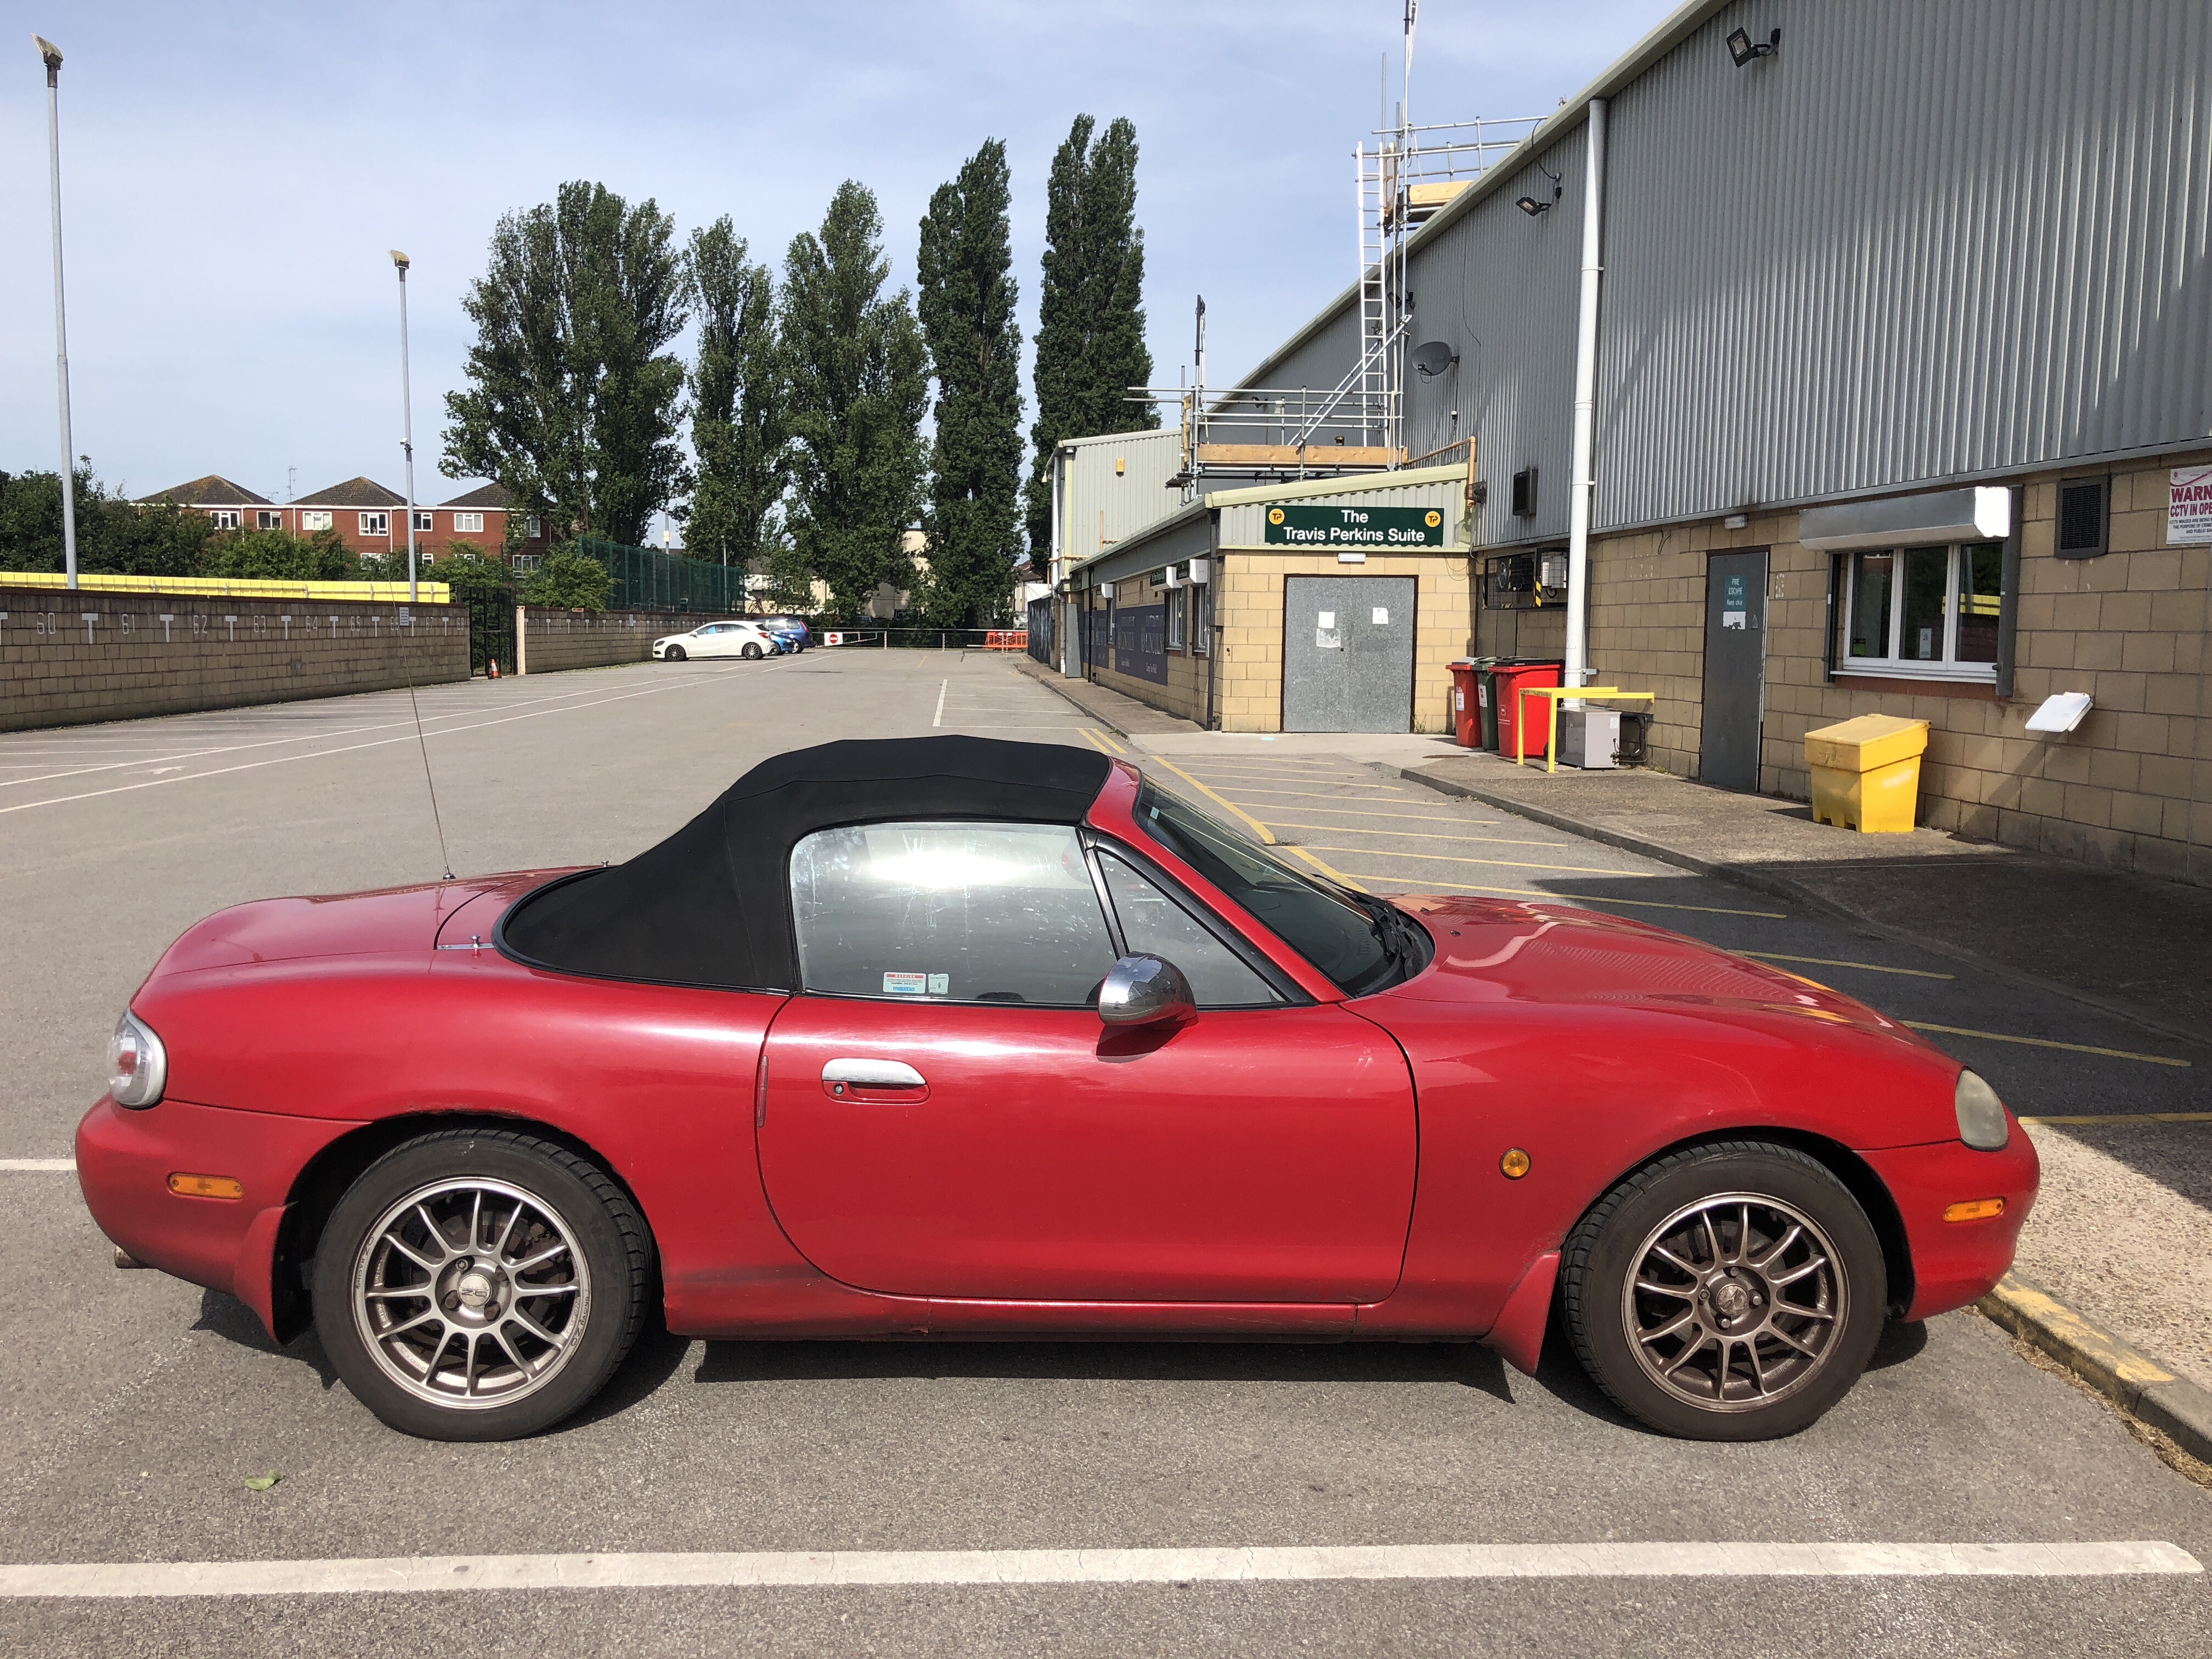 It’s another MX-5 Friday